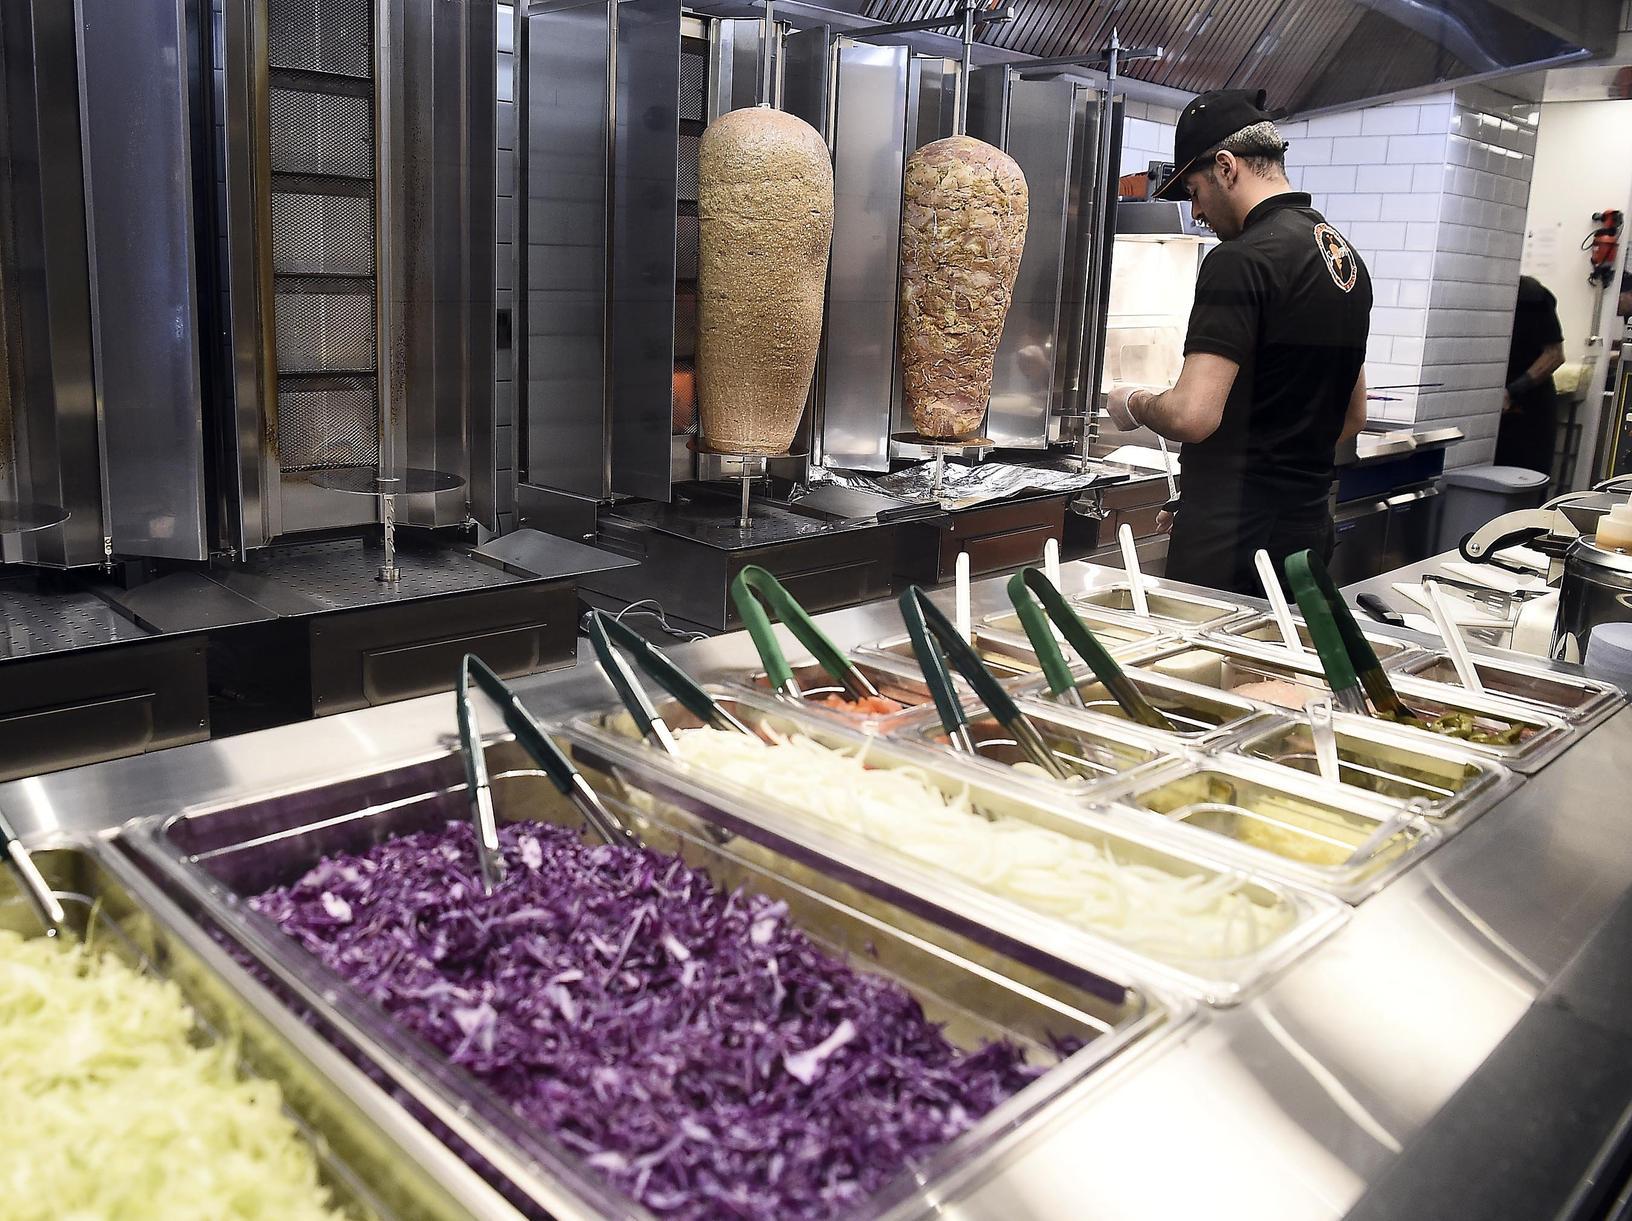 Diners will be able to see their food made fresh in the kitchen through a glass parition behind which the doner and chicken doner will be cooking.